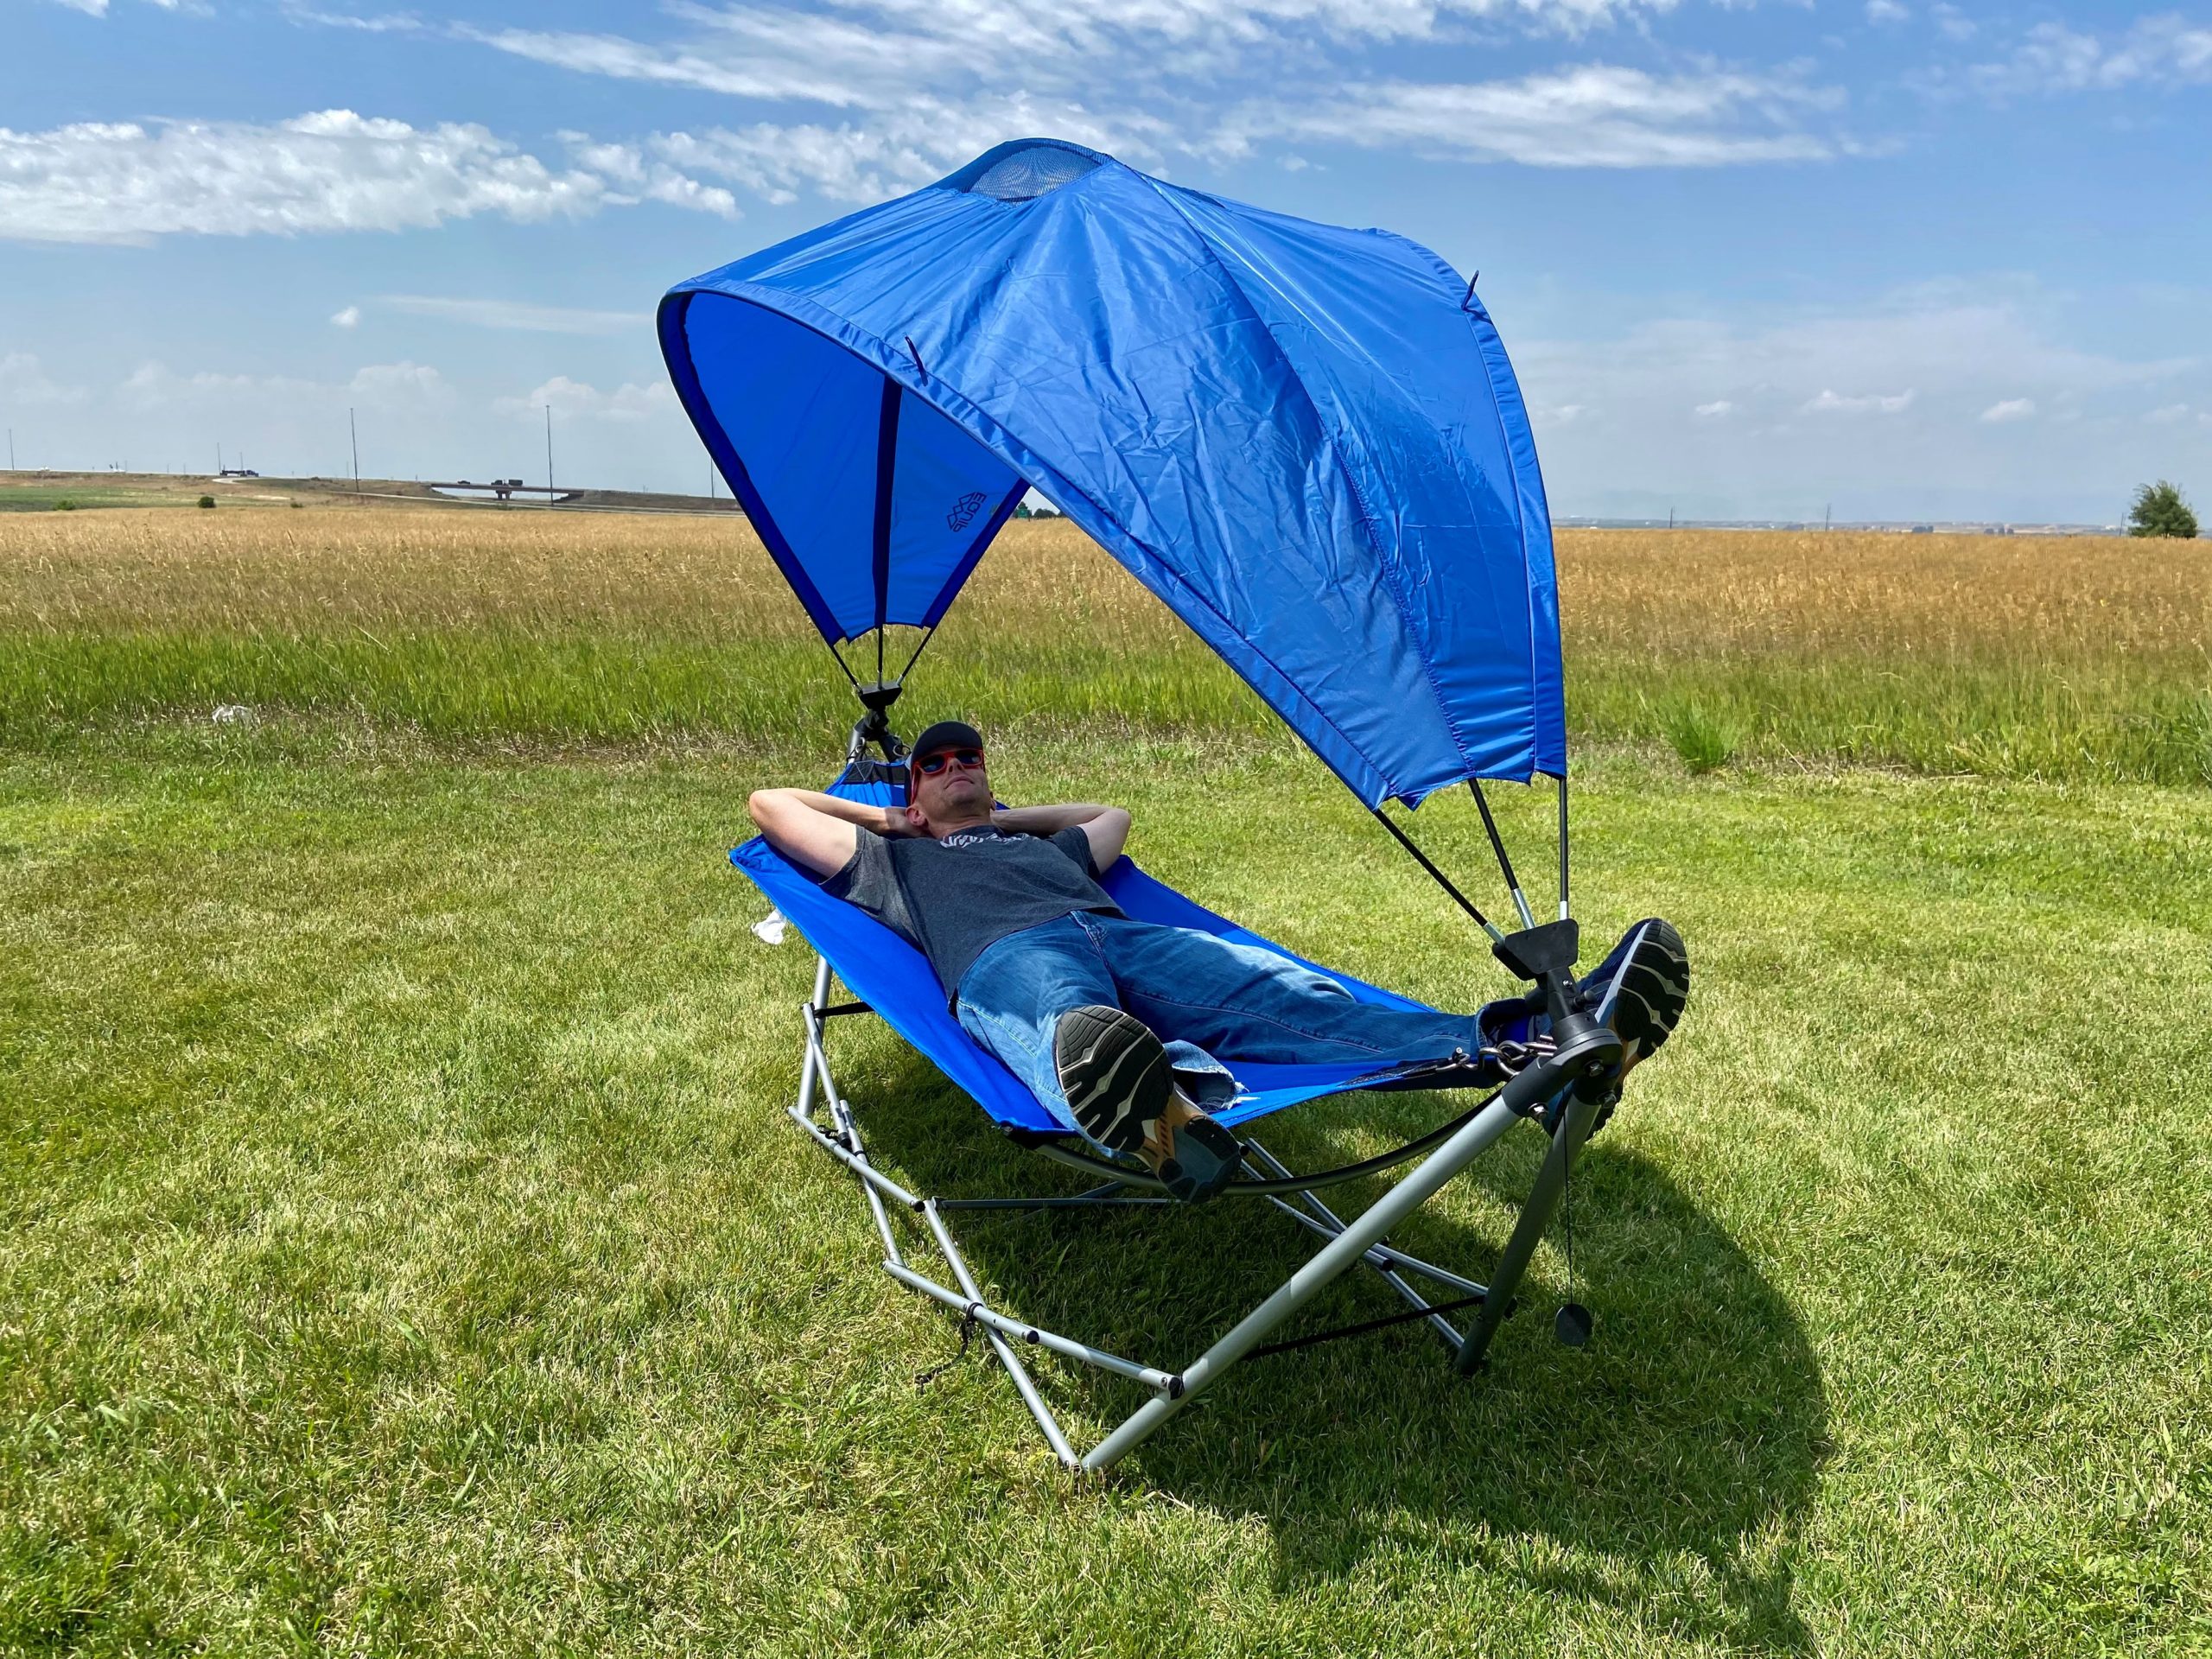 Equip Canopy Review - Tailgating Challenge